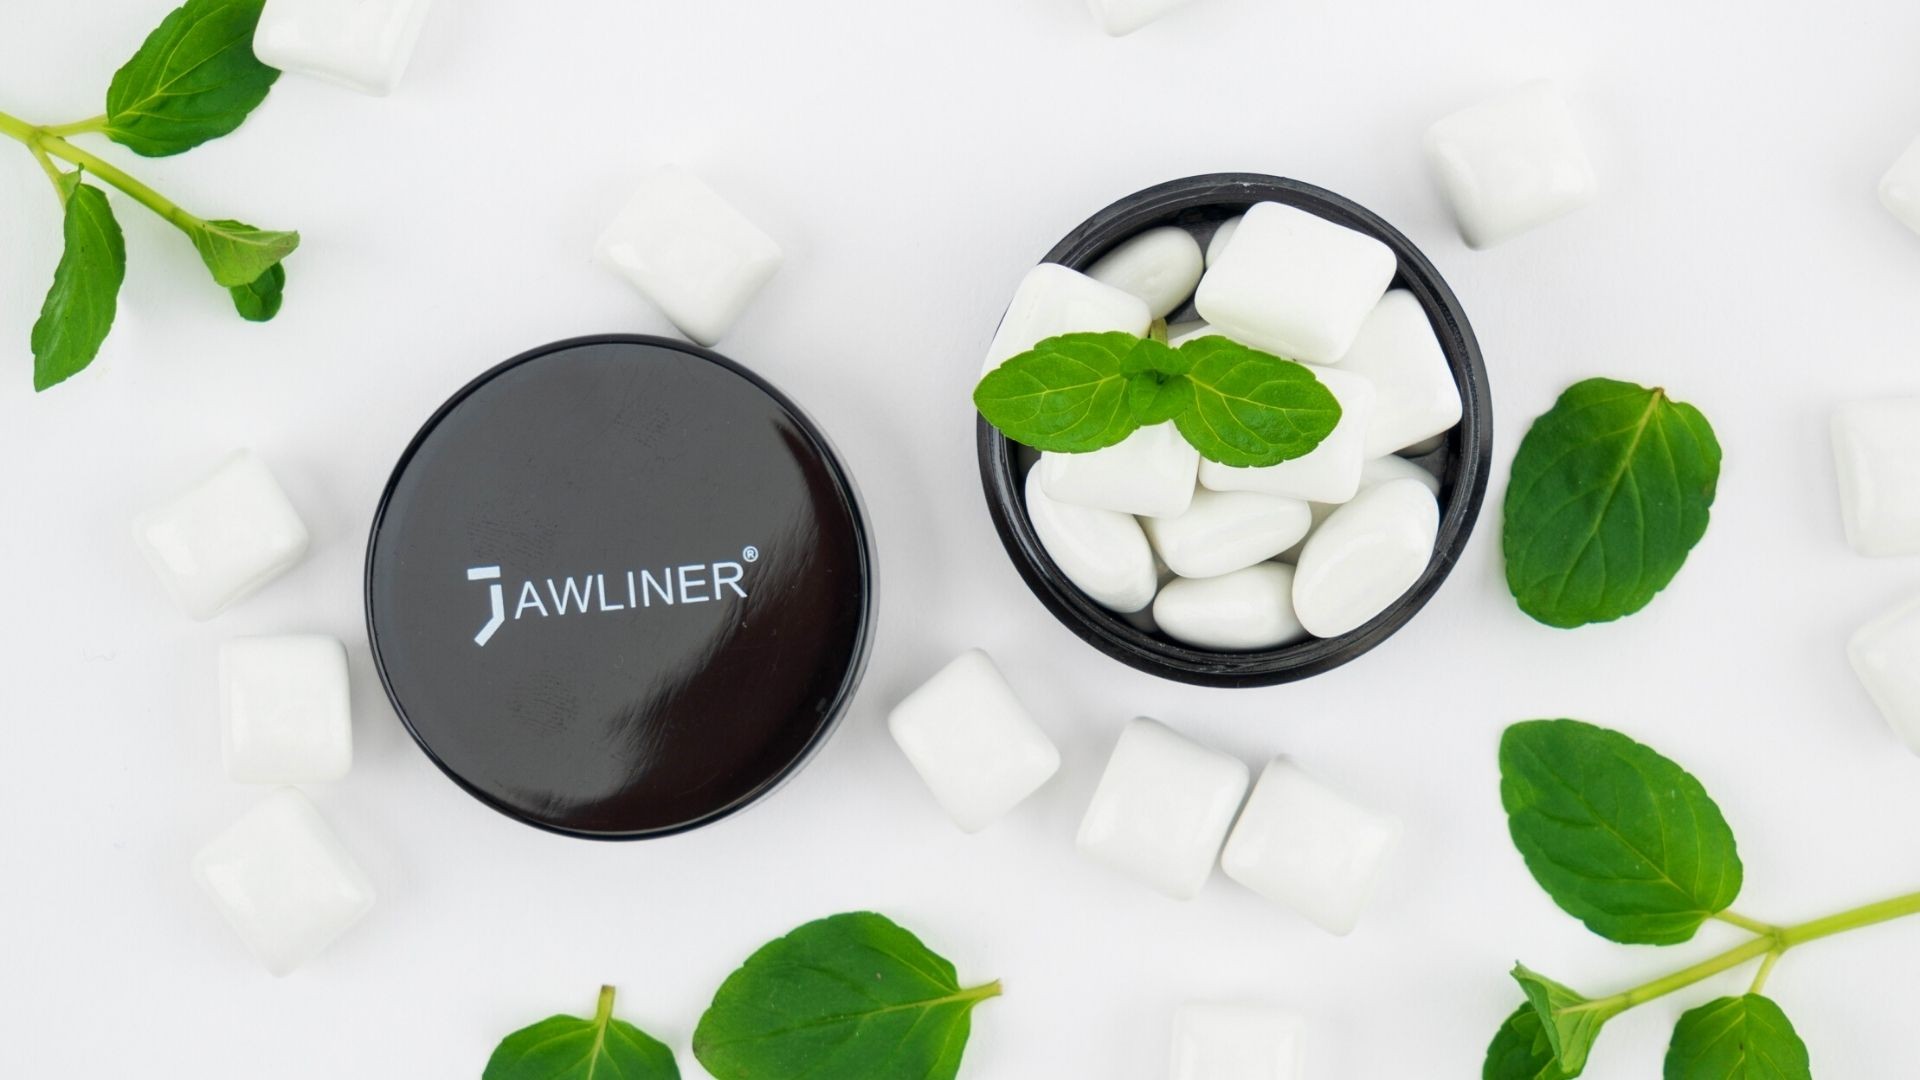 JAWLINER Fitness Chewing Gum (2 months pack) Jawline Sugar Free Mint Gum -  - Jawline Exerciser For Mewing And Shapen The Jaw - 15x Harder Than Regular